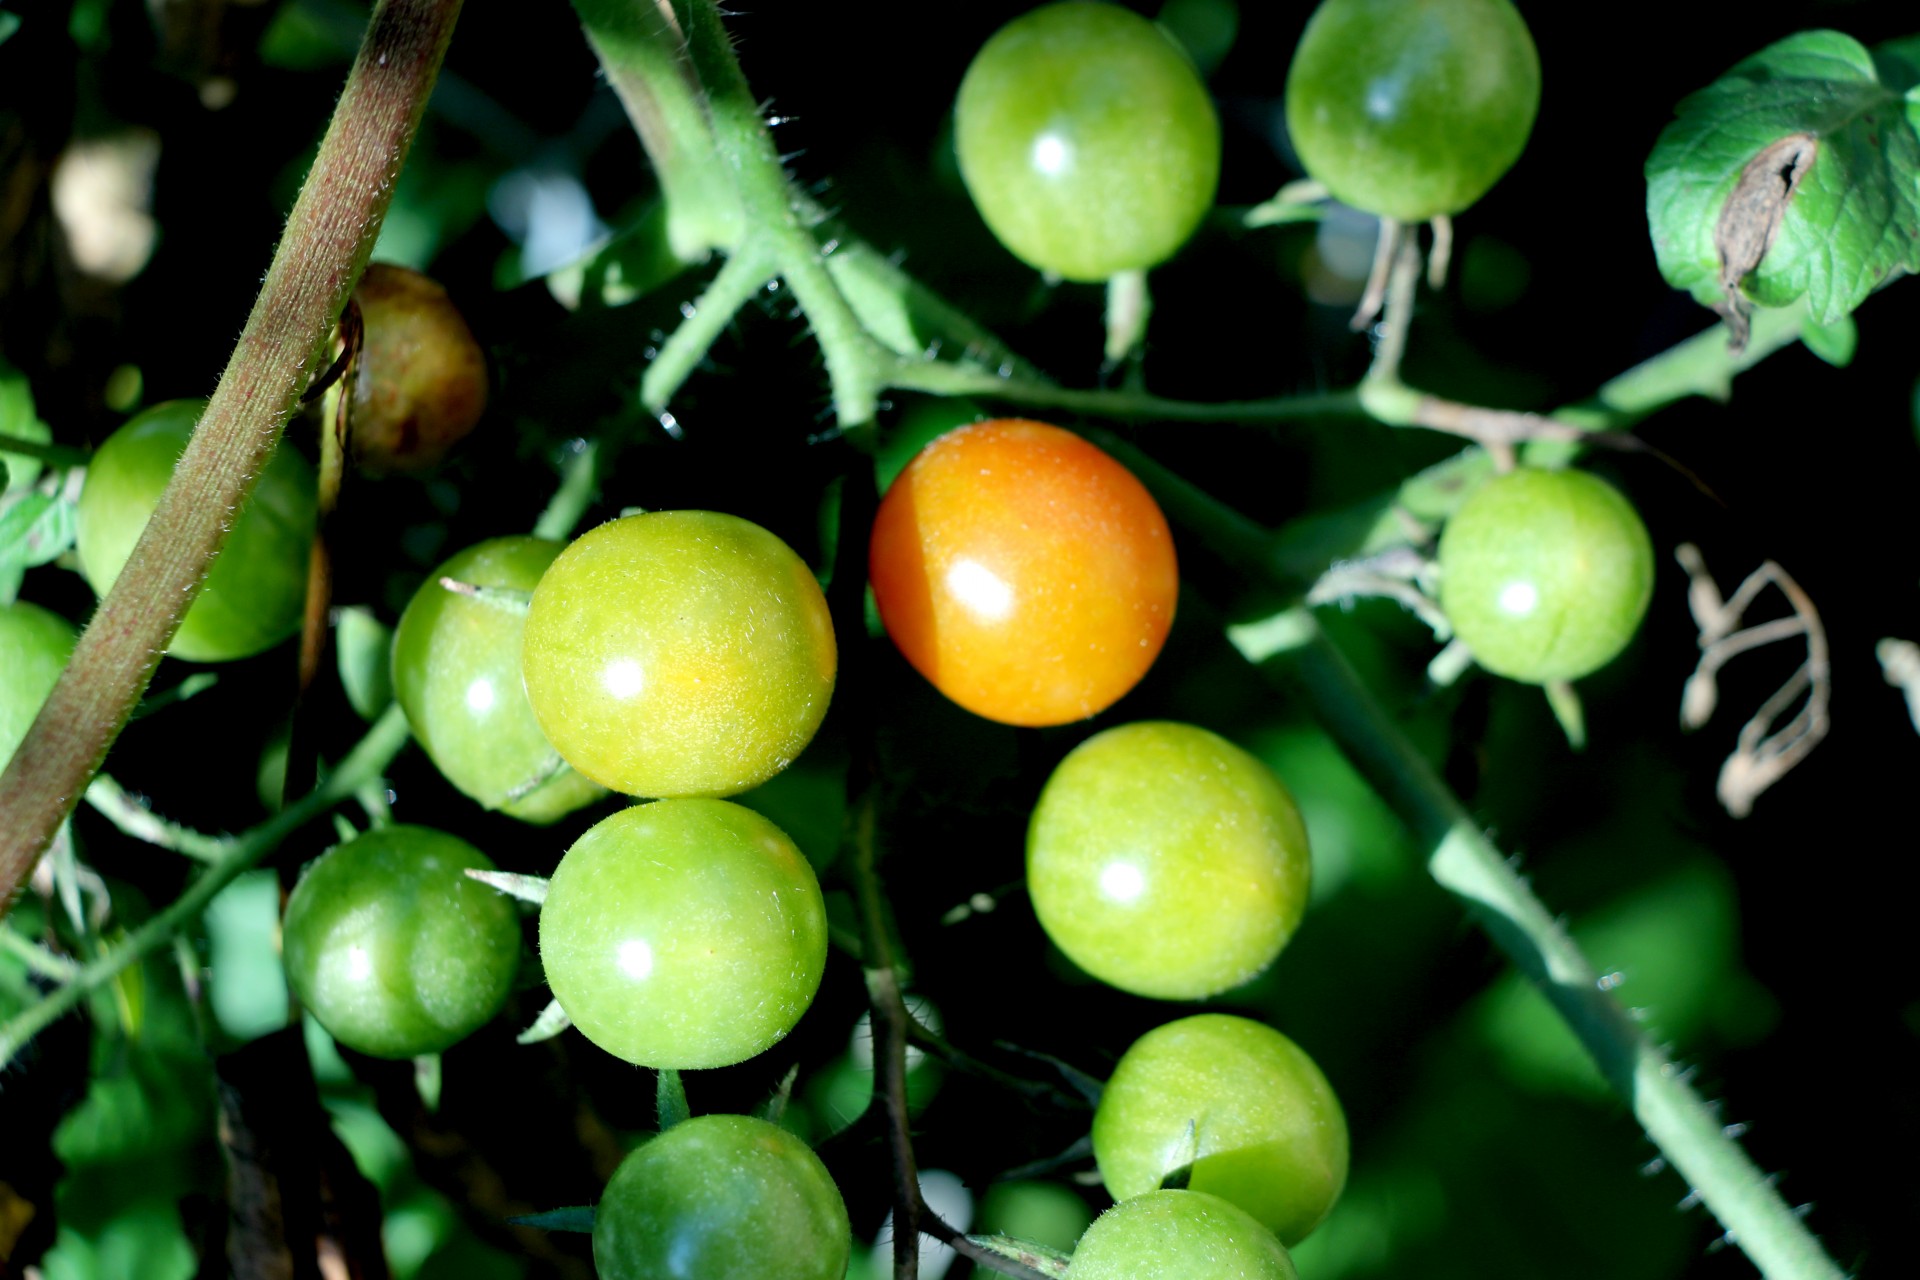 Grape tomatoes at varying stages of ripeness